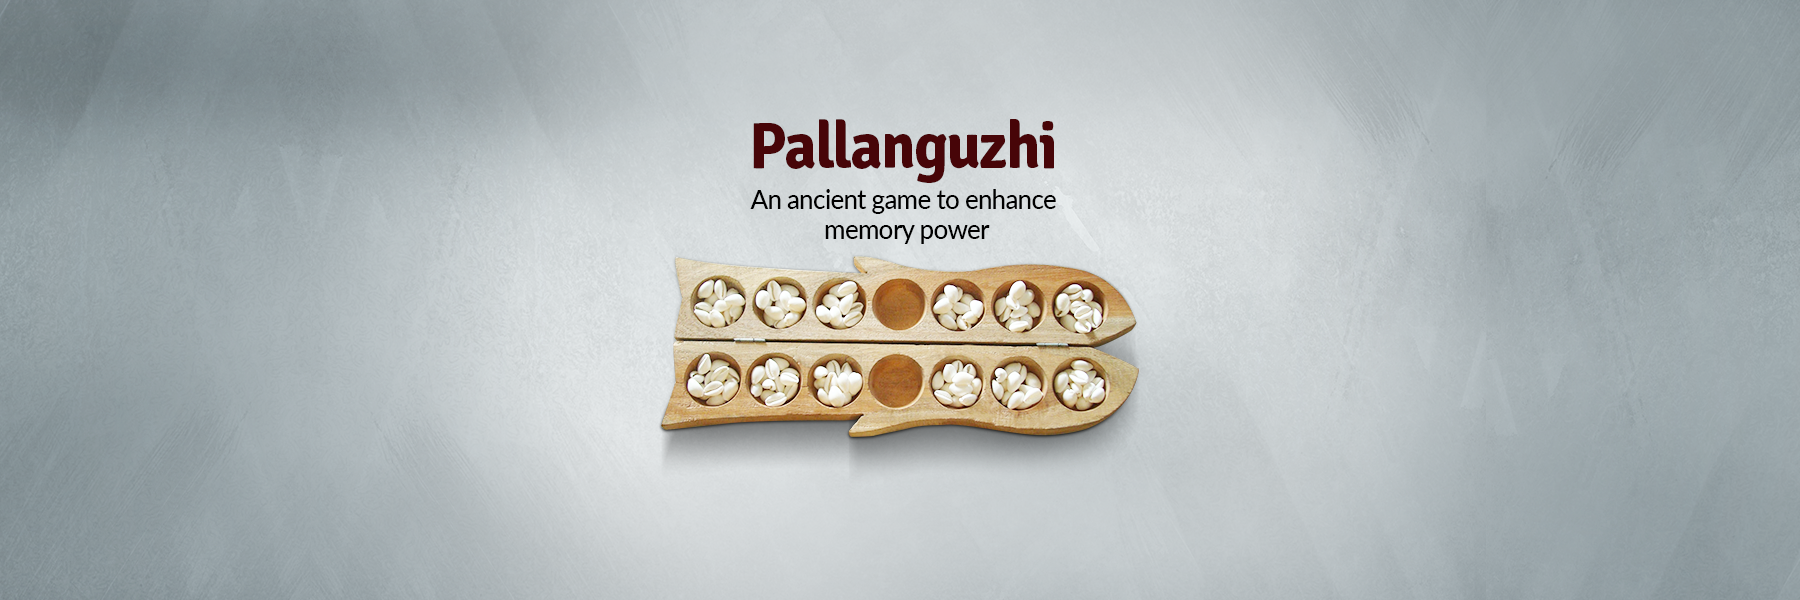 Pallanguzhi: An Ancient Game to Enhance Memory Power FromIndia.com